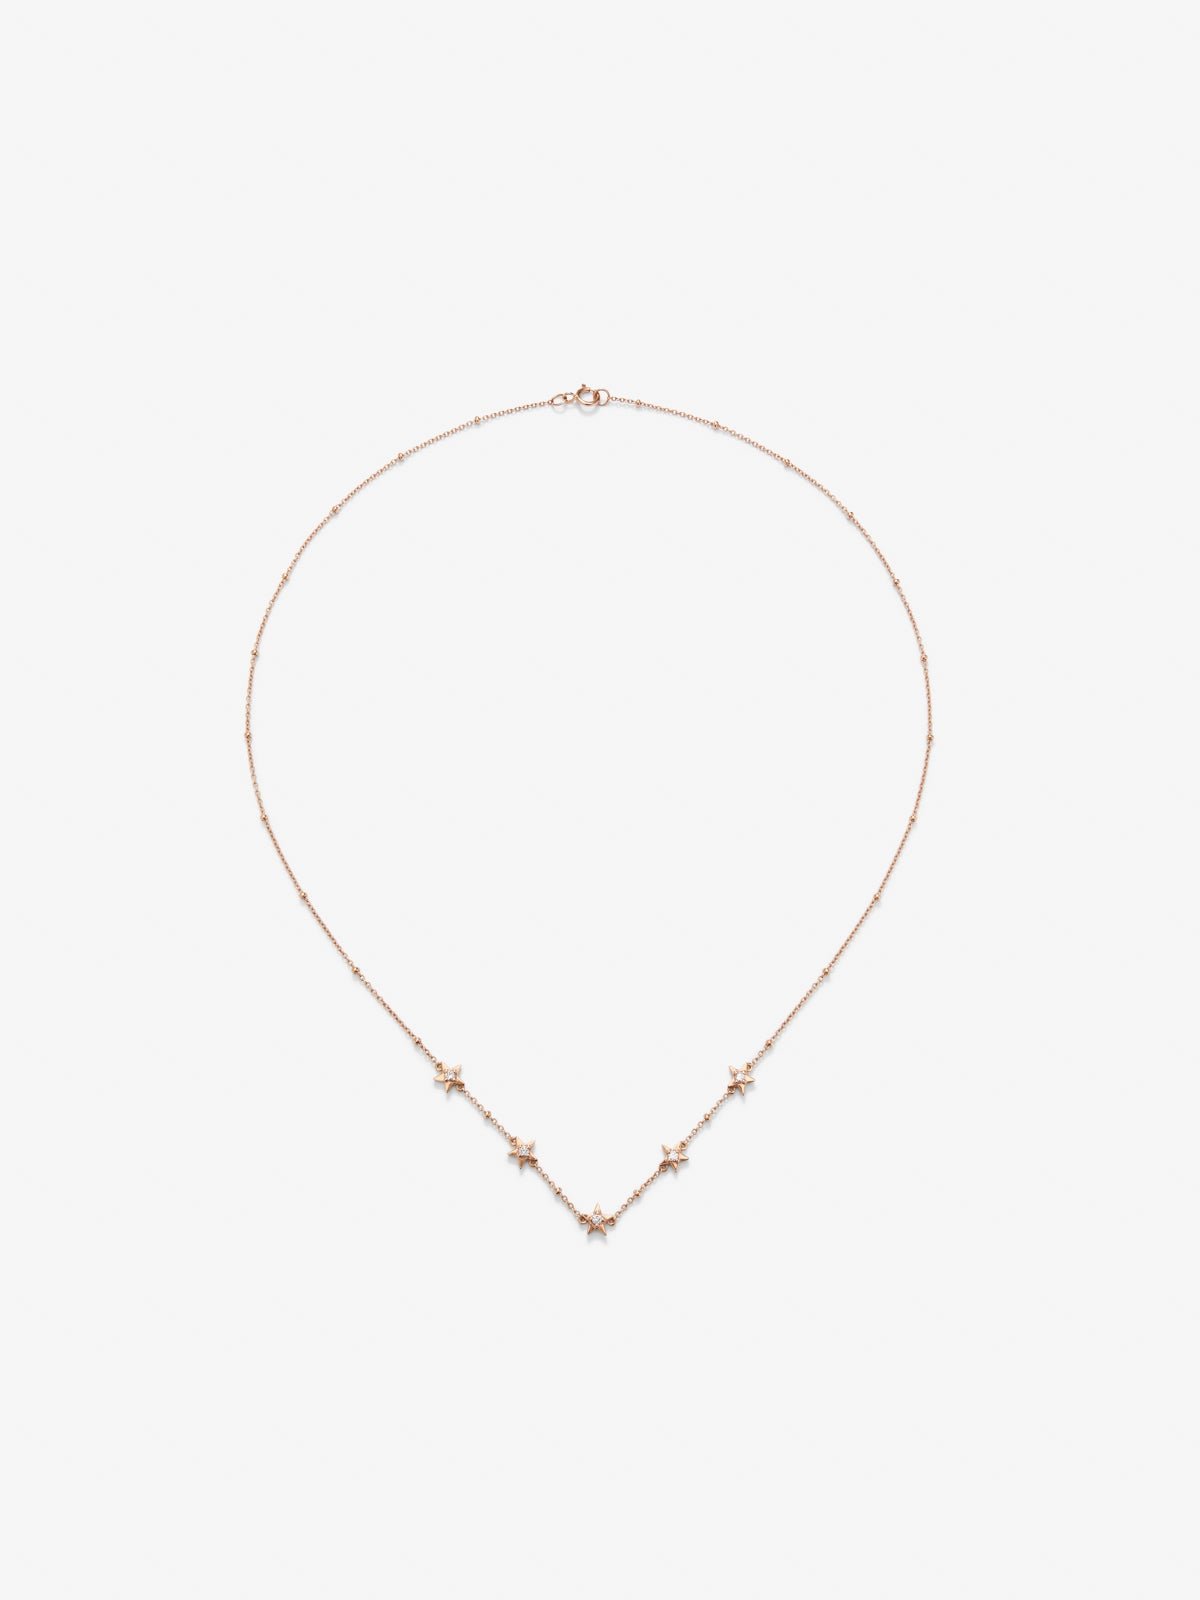 18kt Rose gold star pendant with diamonds